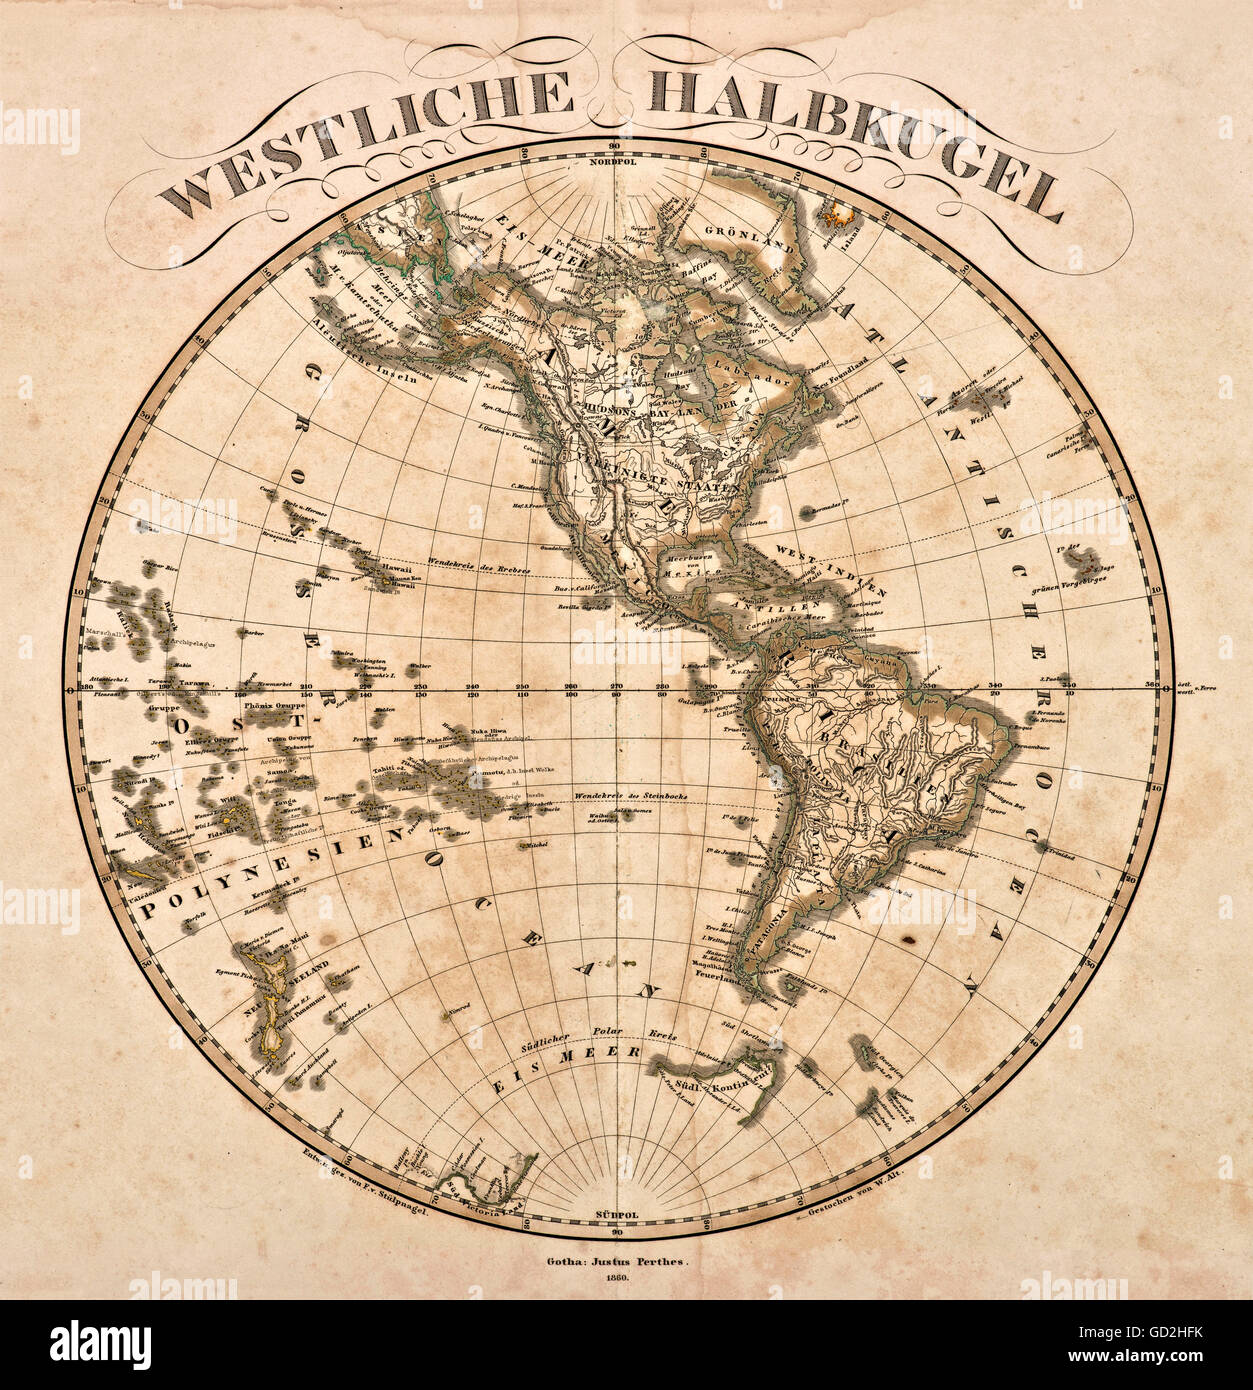 cartography, world map, Western hemisphere, out of 'Hand-Atlas ueber alle Theile der Erde und ueber das Weltgebaeude', publishing house Justus Perthes, Gotha, Stieler's portable atlas, Germany, 1860, Additional-Rights-Clearences-Not Available Stock Photo